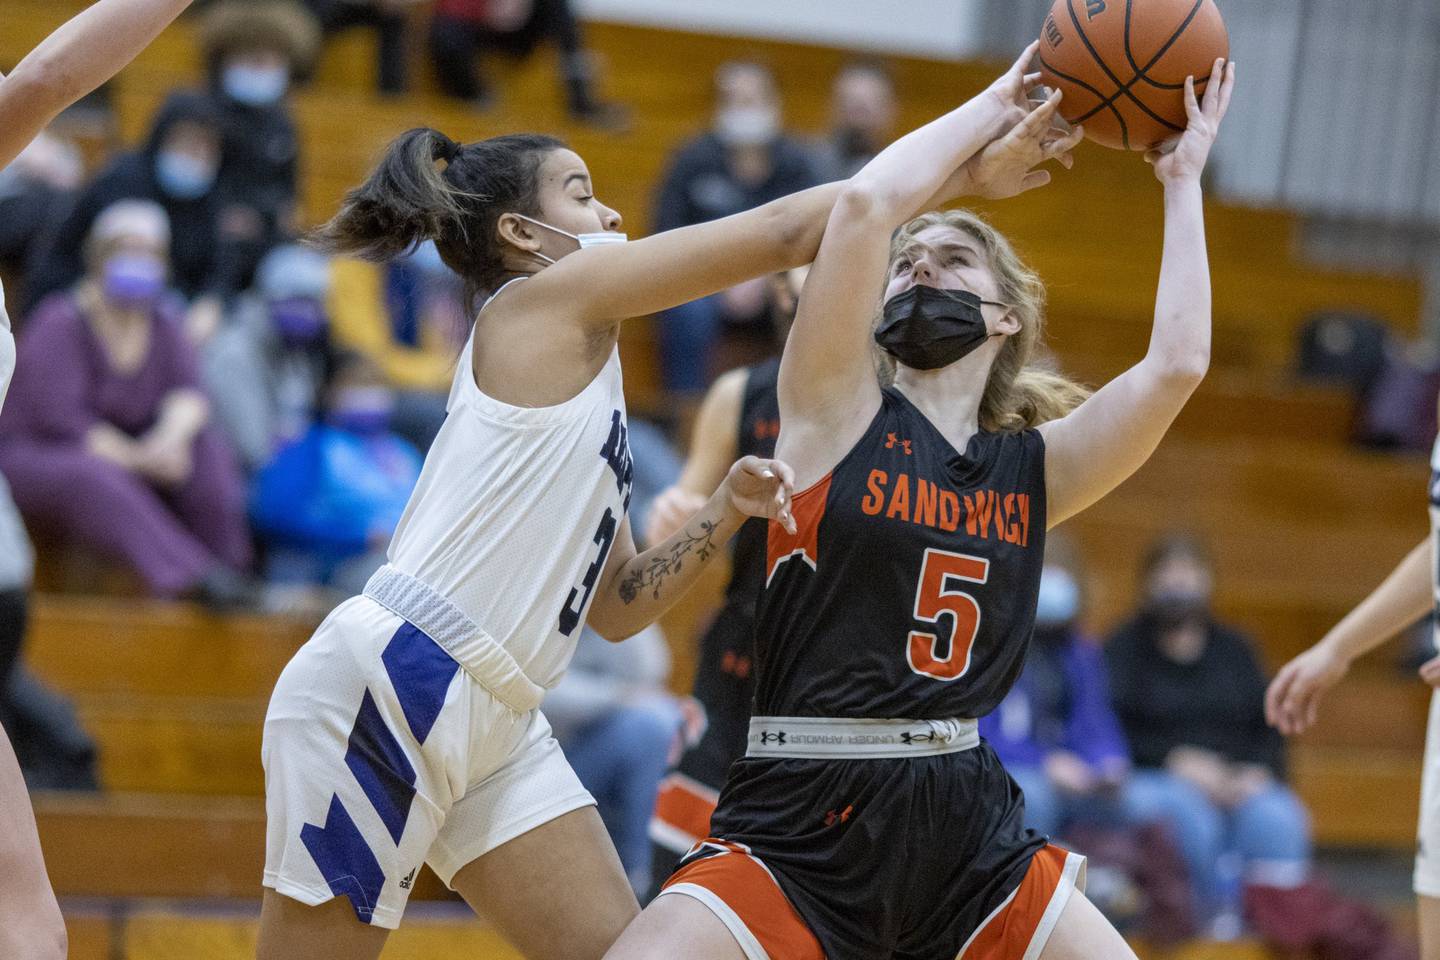 Sandwich's Alexis Sexton (5) works against Plano's Ryssa Woodhouse last January in Plano.